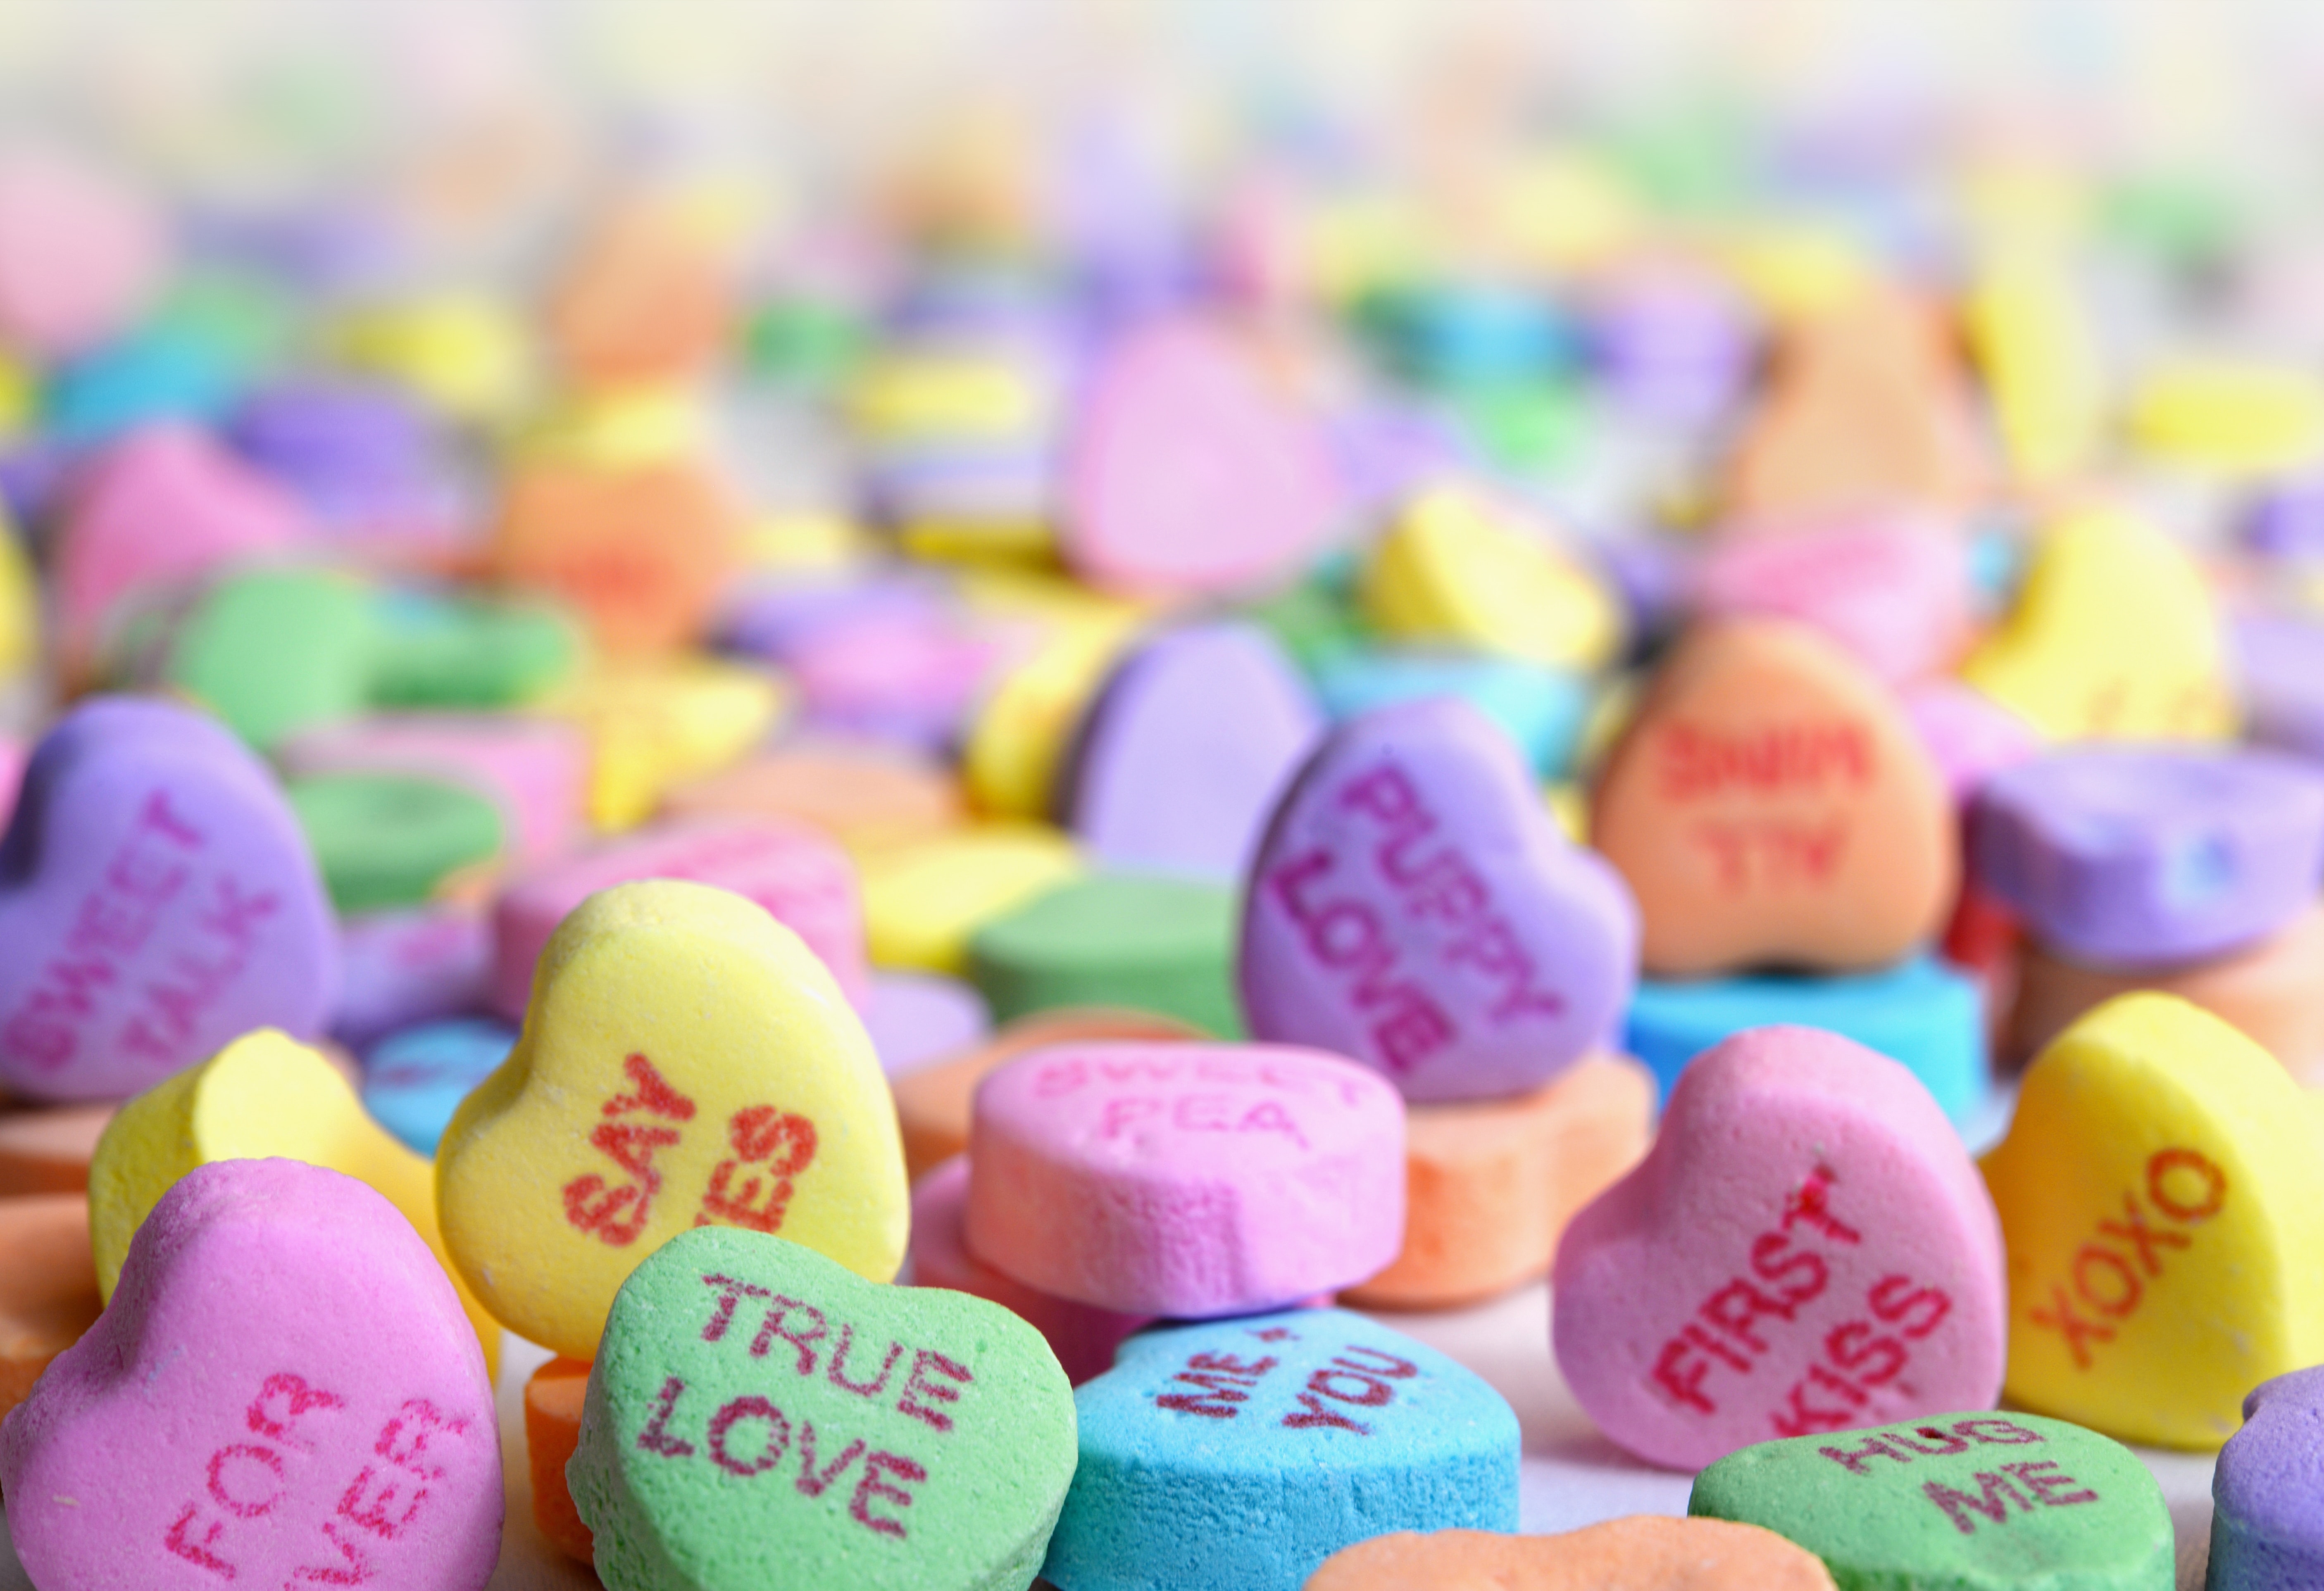 Lots of Candy Conversation Hearts